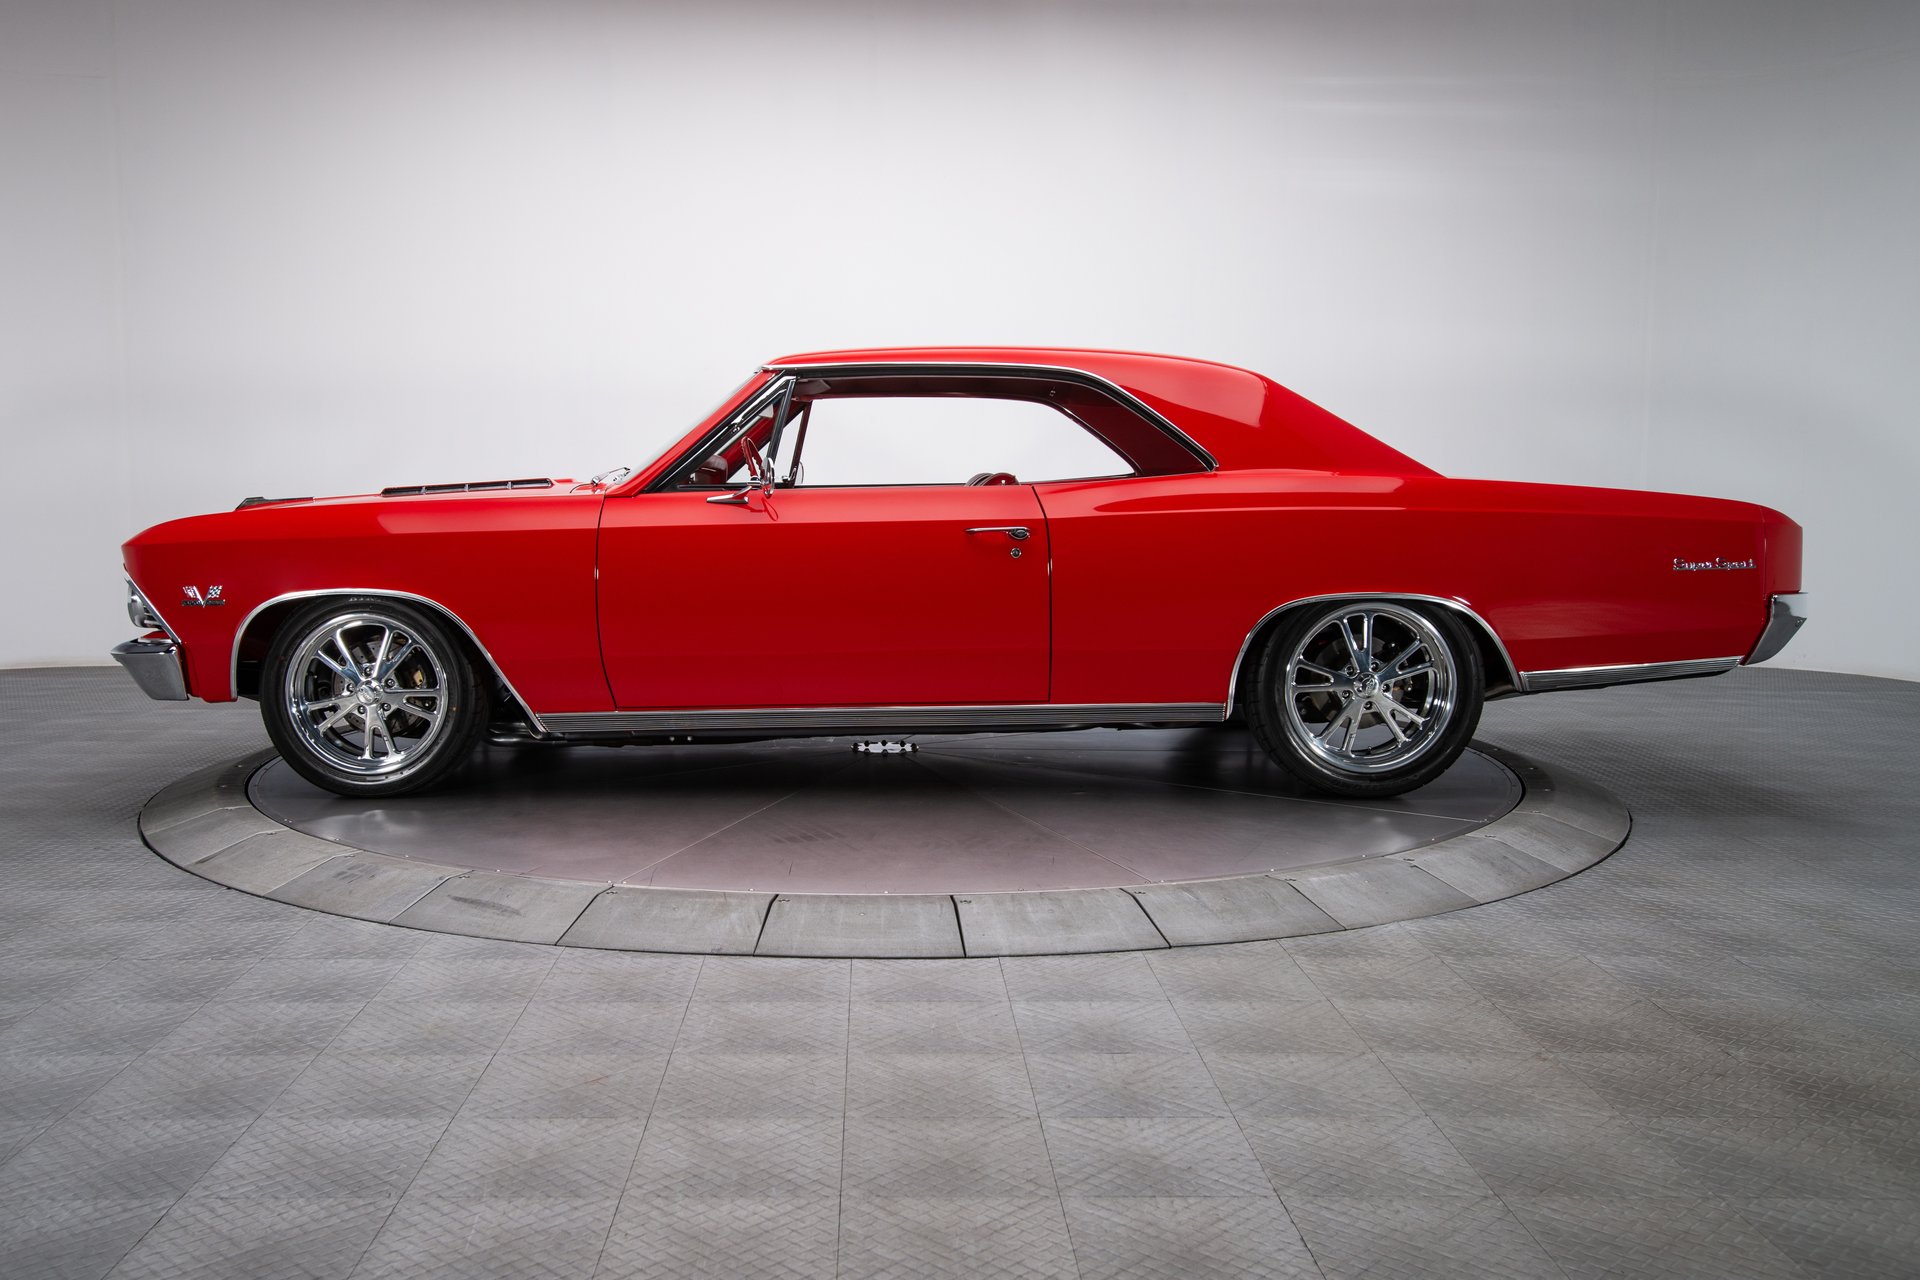 Chevrolet Chevelle Rk Motors Classic Cars And Muscle Cars For Sale